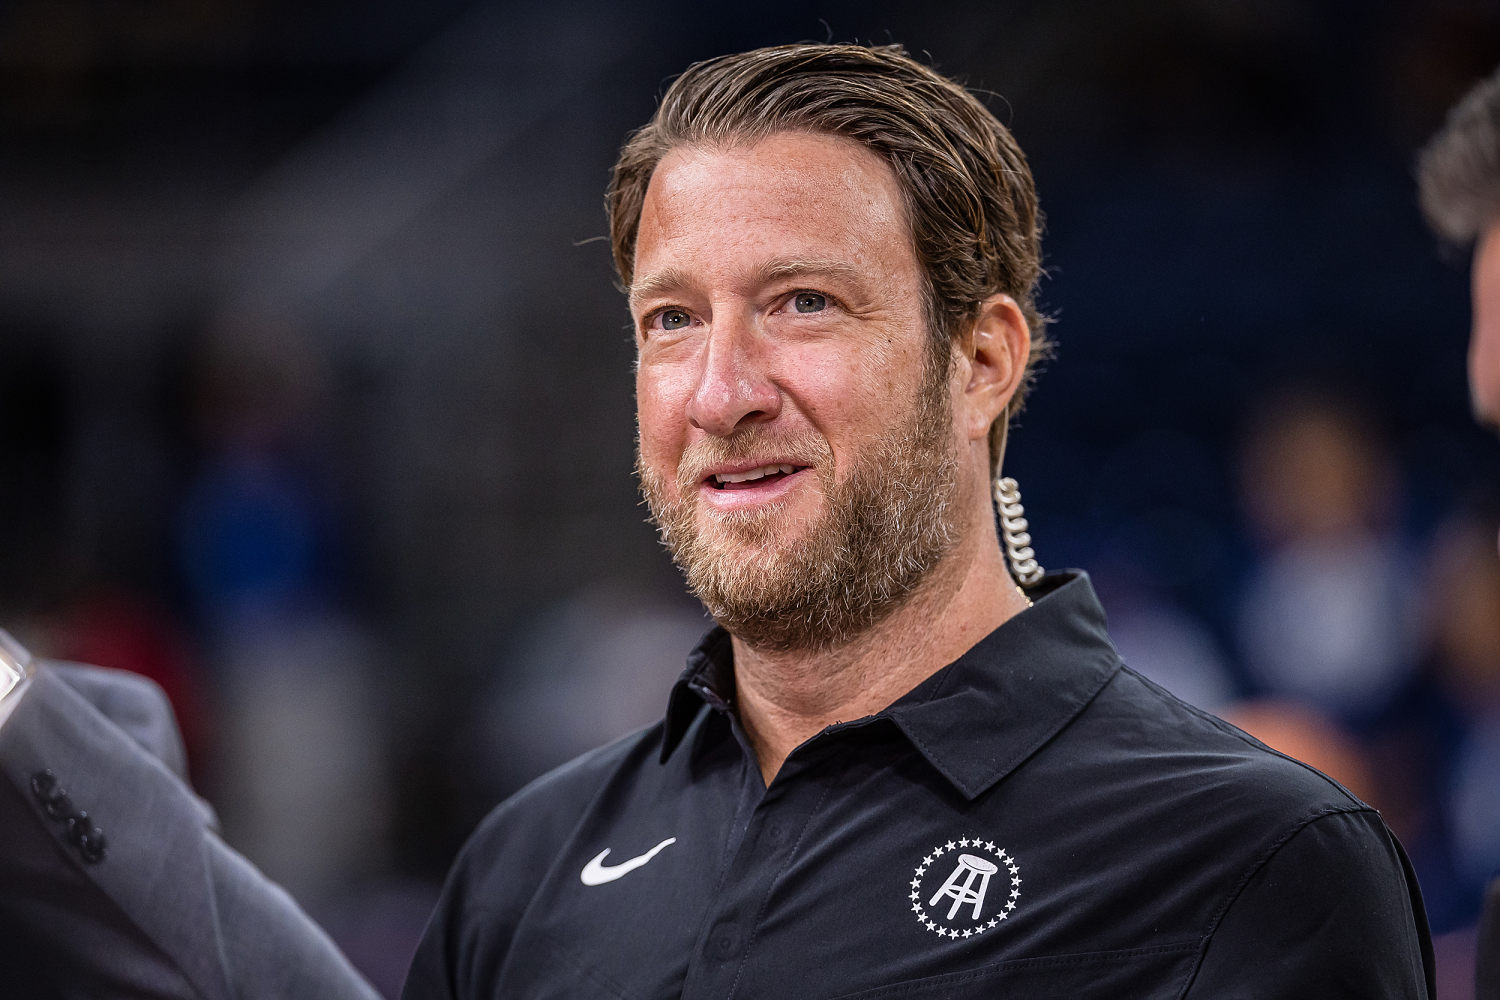 Barstool's Dave Portnoy cashed in $2.7 million betting on UConn in NCAA men's final